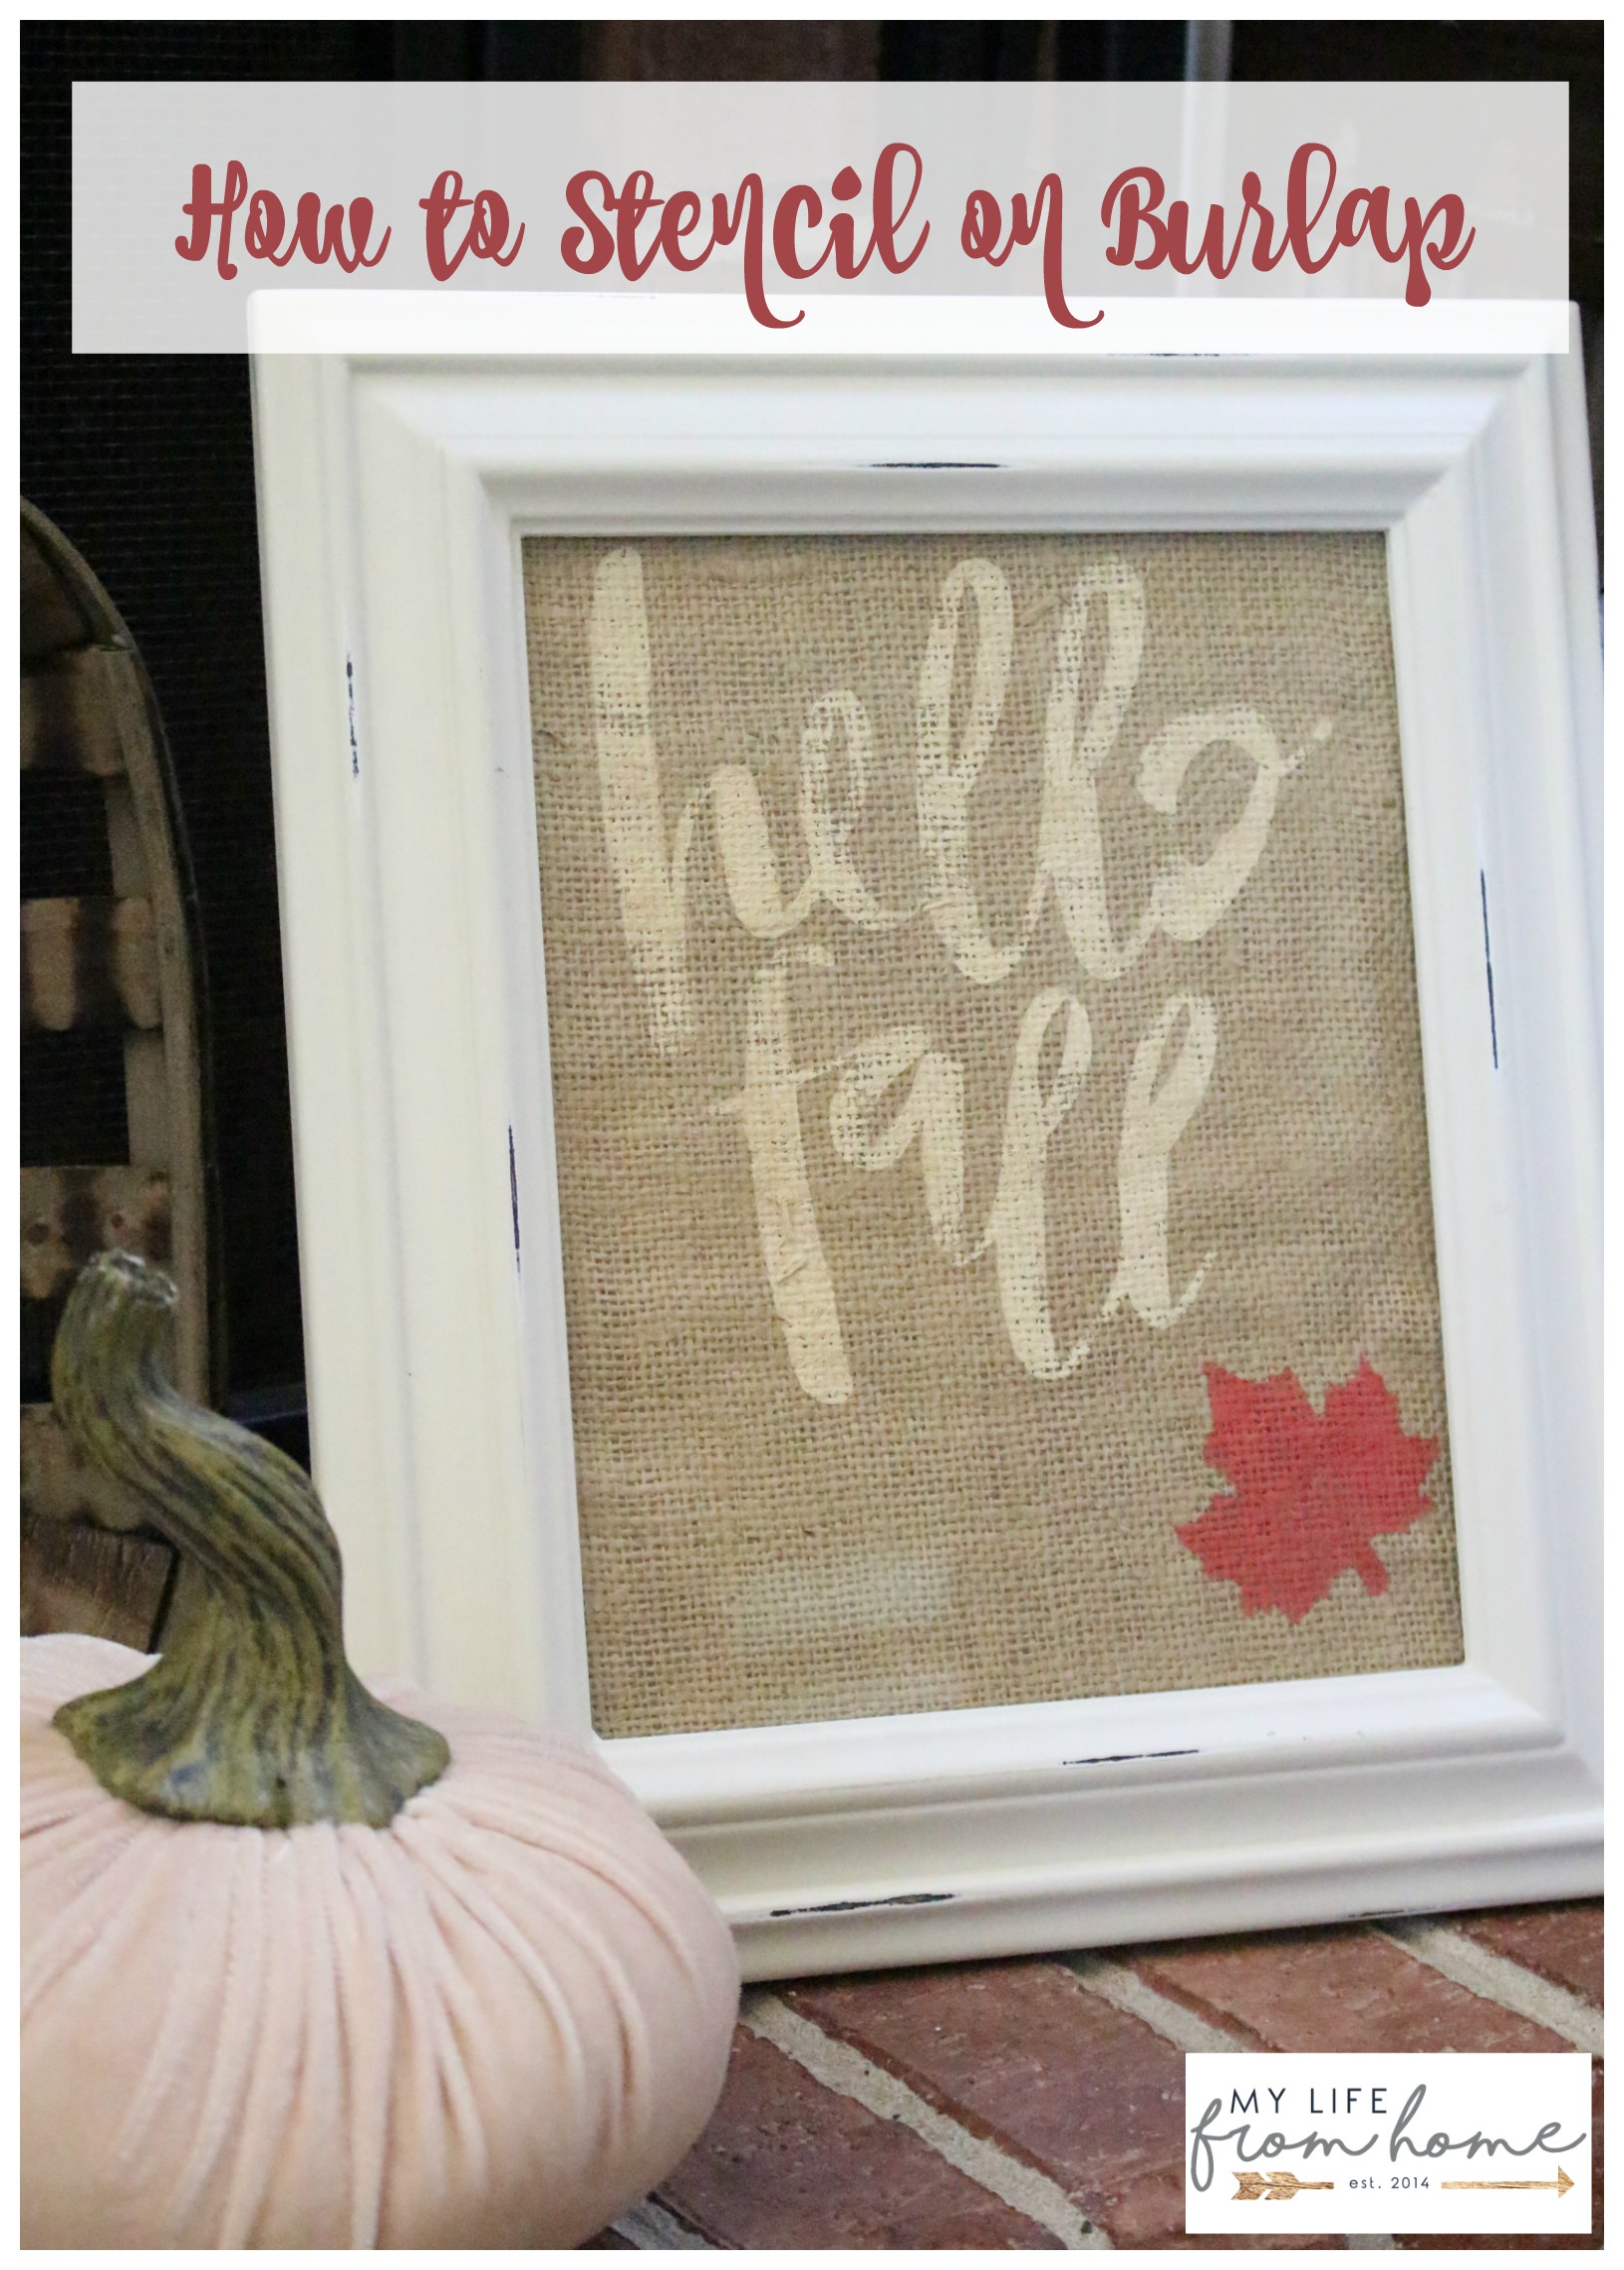 how-to-stencil-on-burlap-silhouette-challenge-stencil-on-burlap-painting-fabric-burlap-project-autumn-projects-fall-art-crafts-for-fall-seasonal-decor